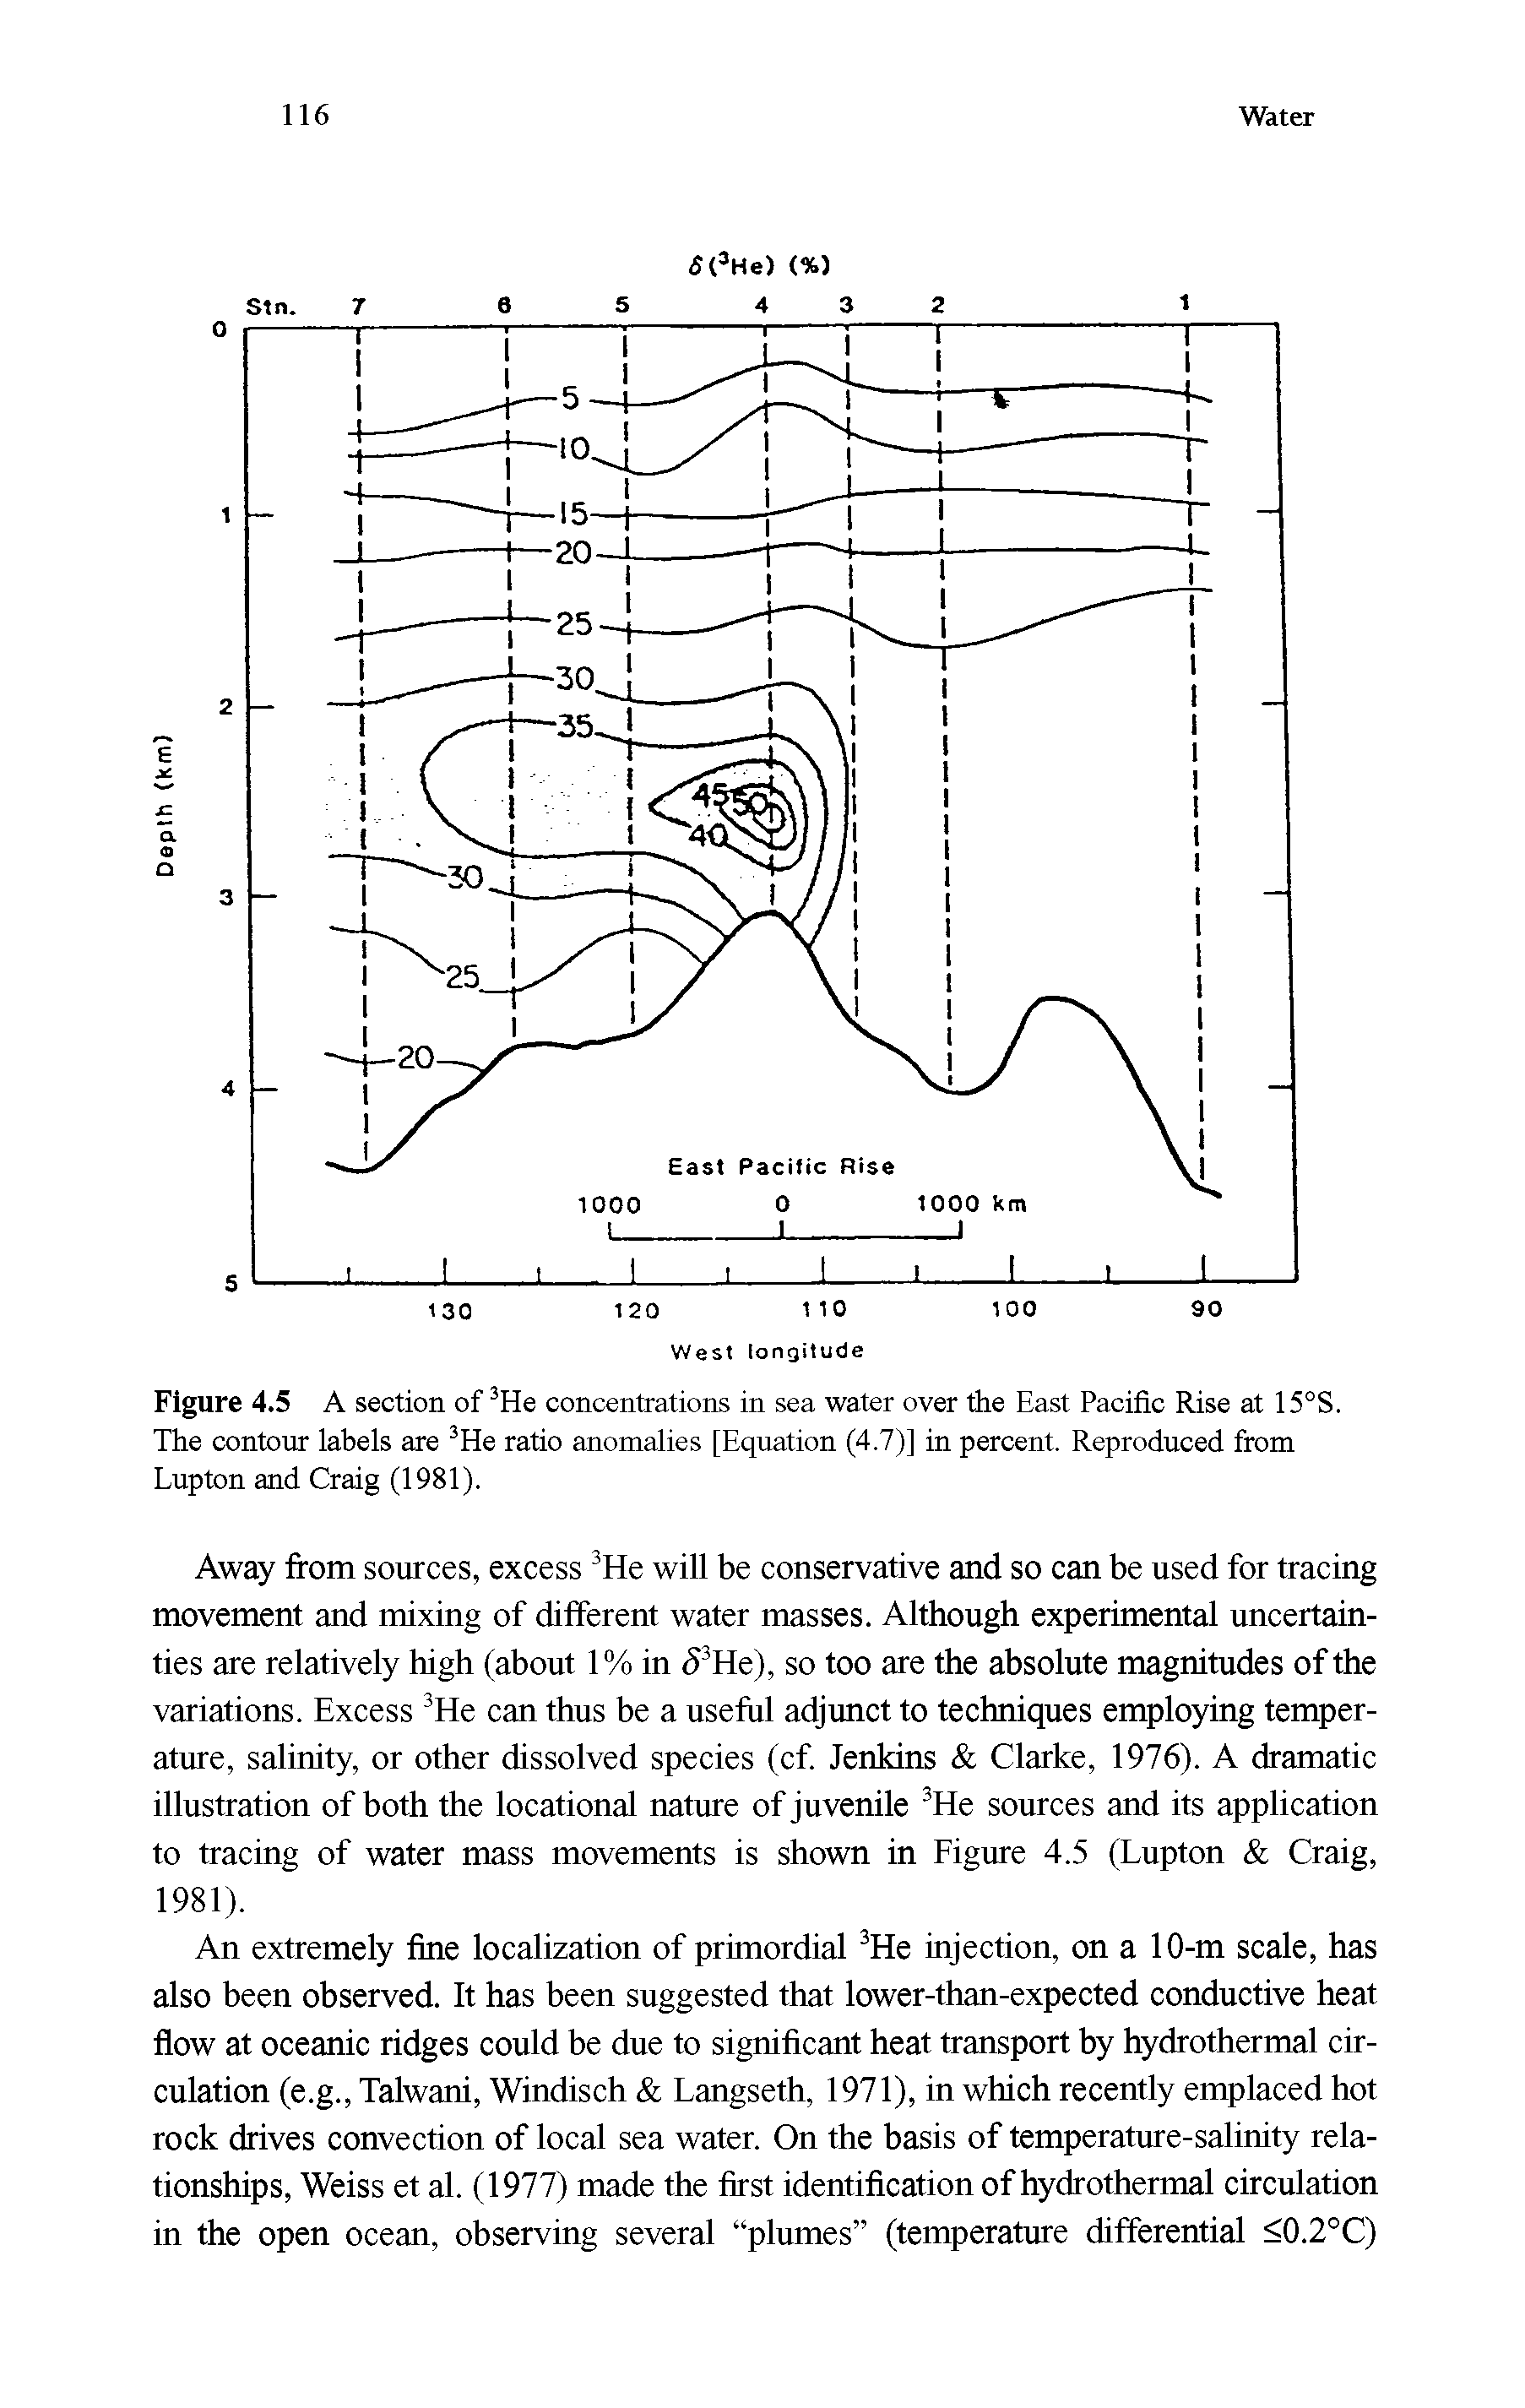 Figure 4.5 A section of 3He concentrations in sea water over the East Pacific Rise at 15°S. The contour labels are 3He ratio anomalies [Equation (4.7)] in percent. Reproduced from Lupton and Craig (1981).